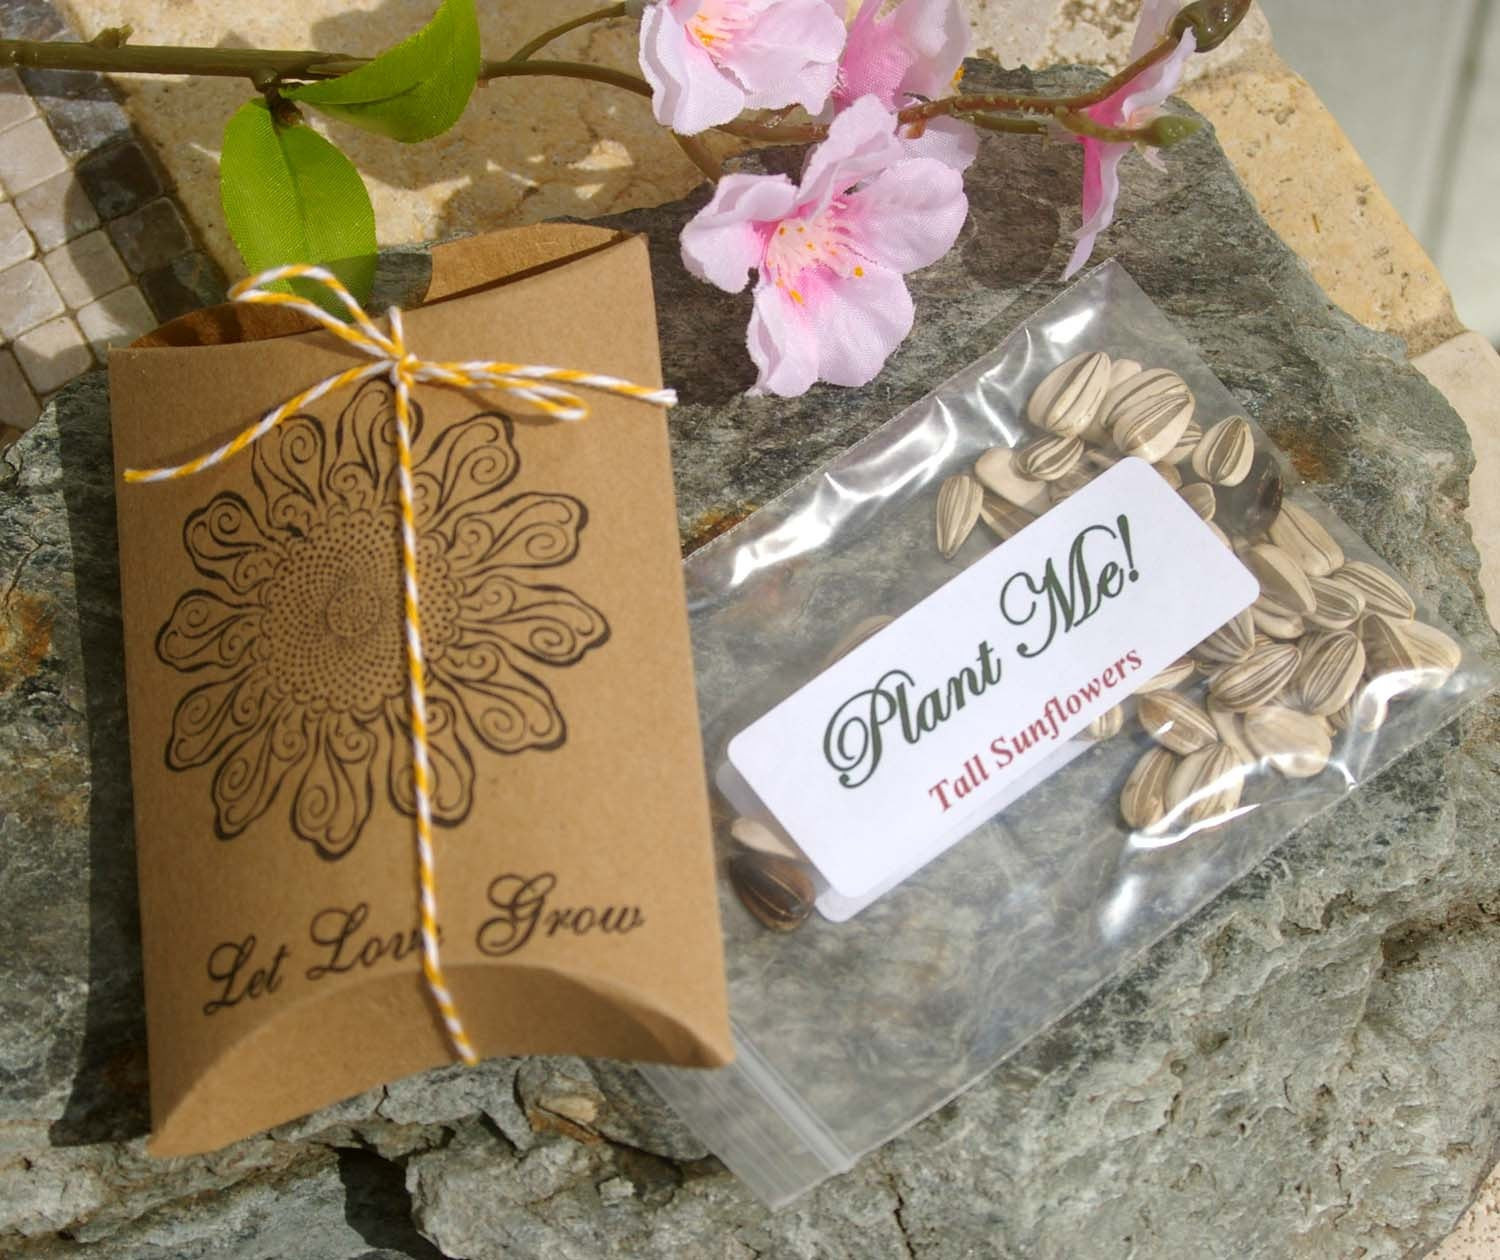 Flower Wedding Favors
 Wedding Favors With Sunflower Seeds Let Love Grow by